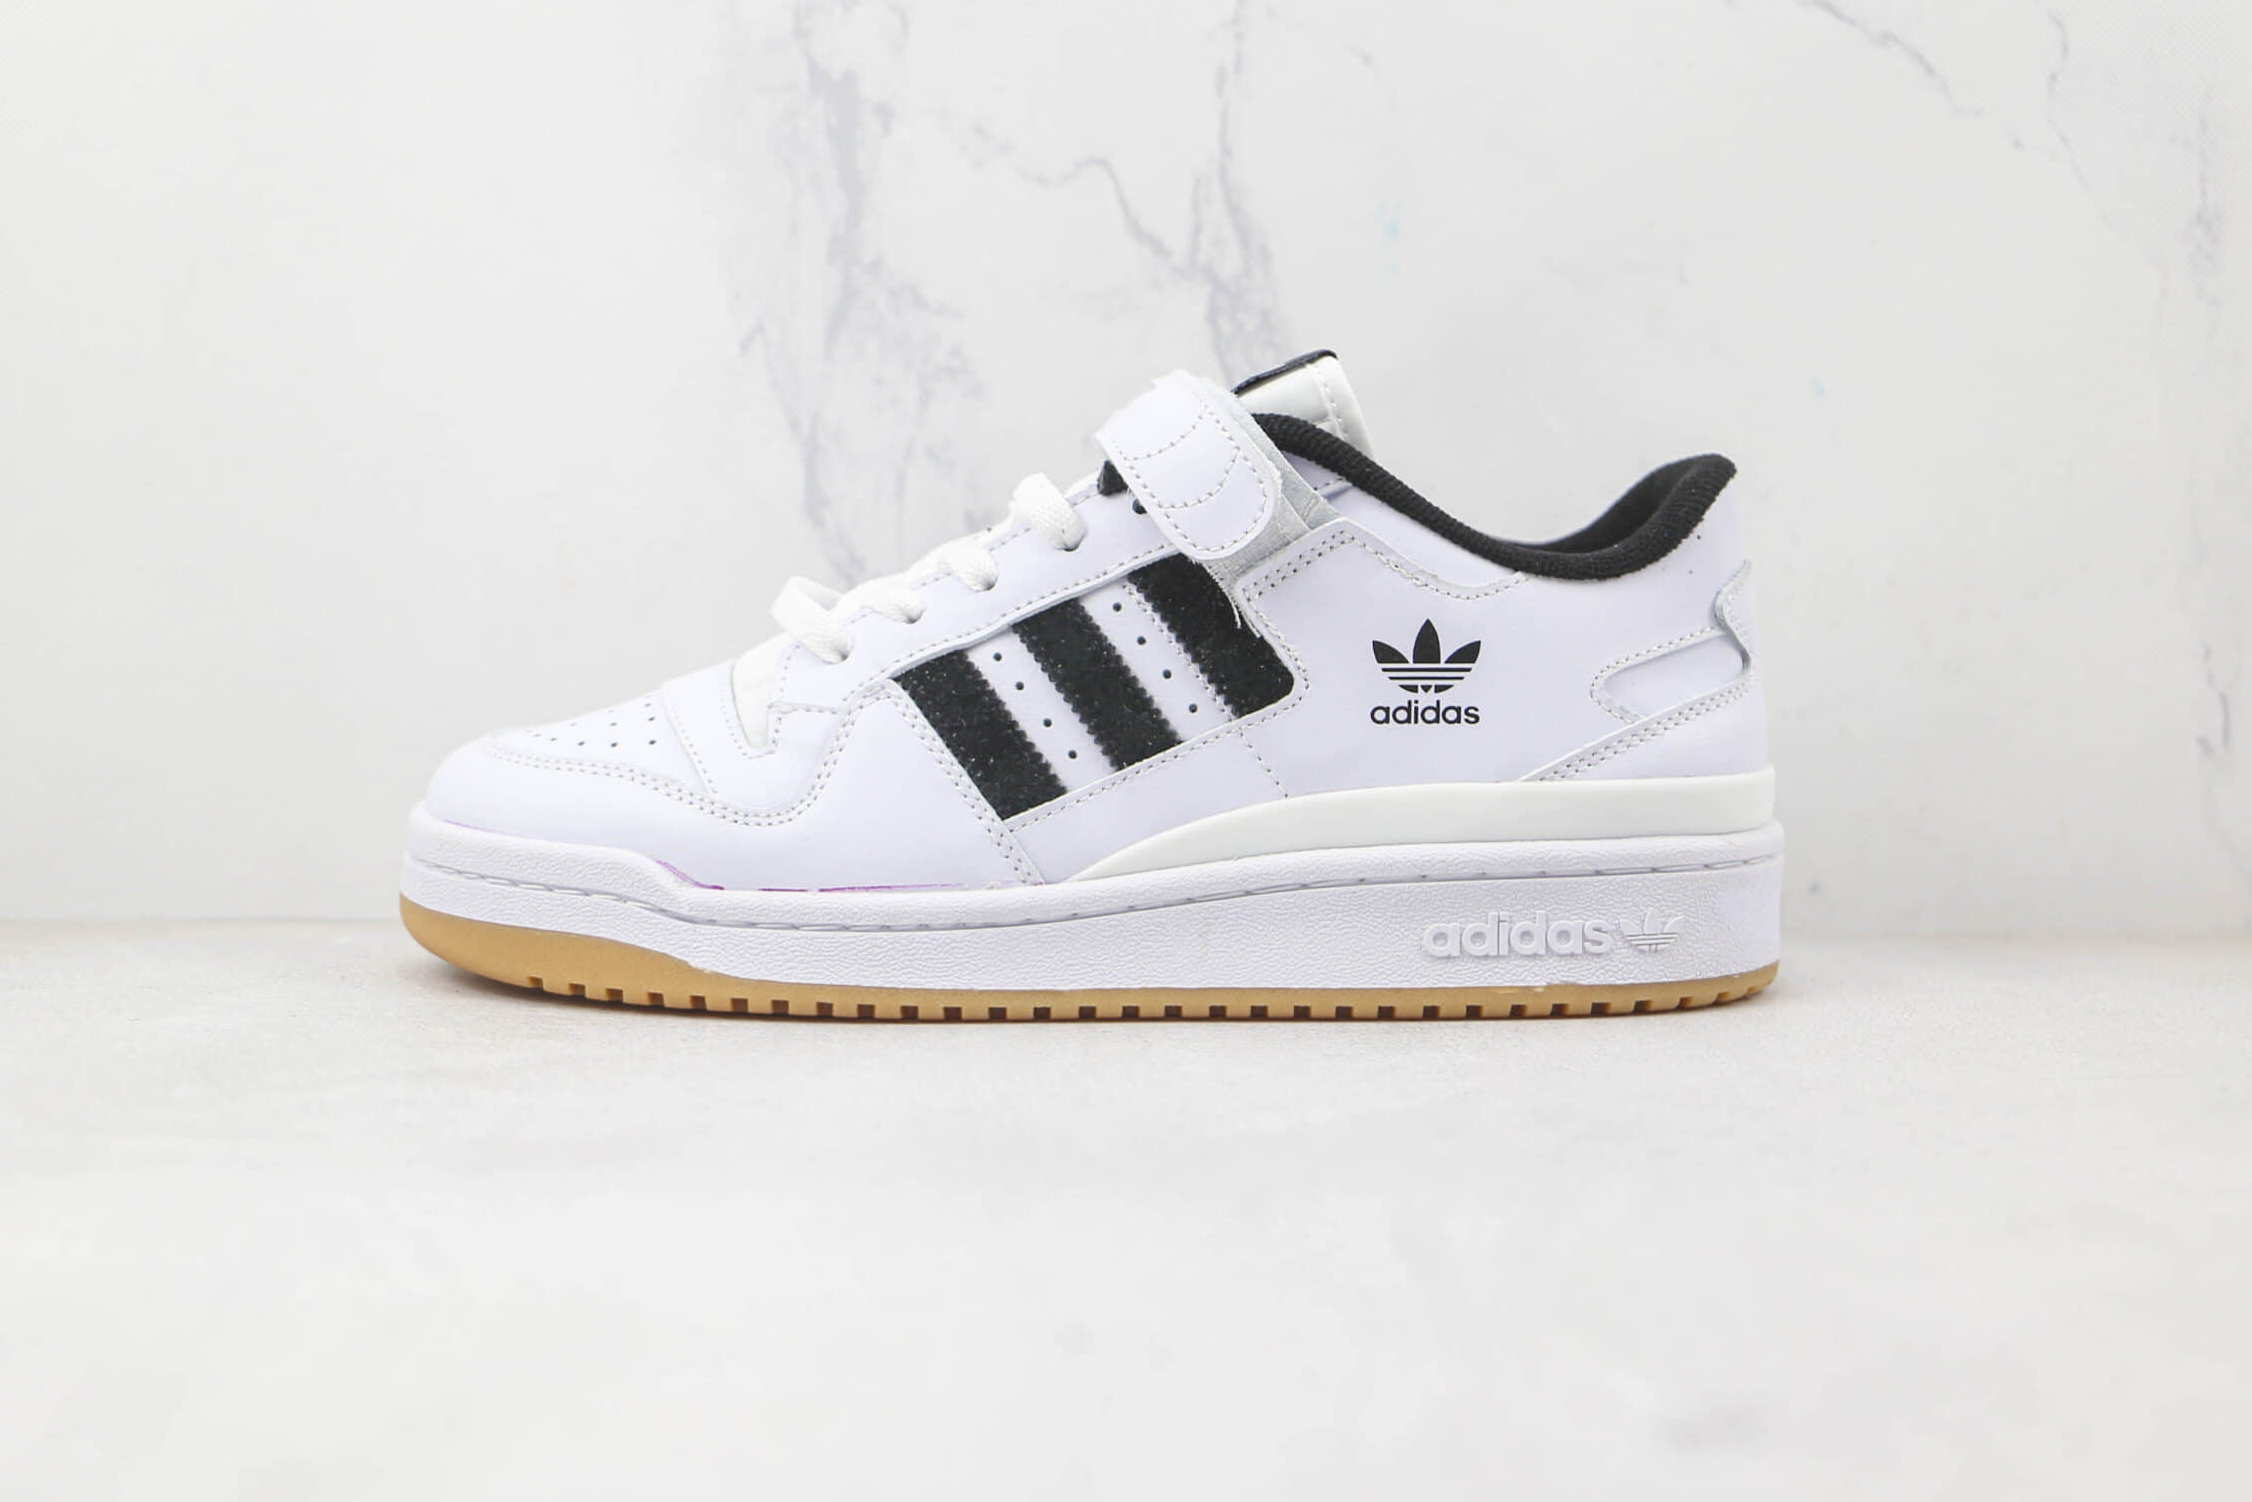 Adidas Originals Forum Low Core Black Cloud White G25813 - Sleek and Stylish Sneakers